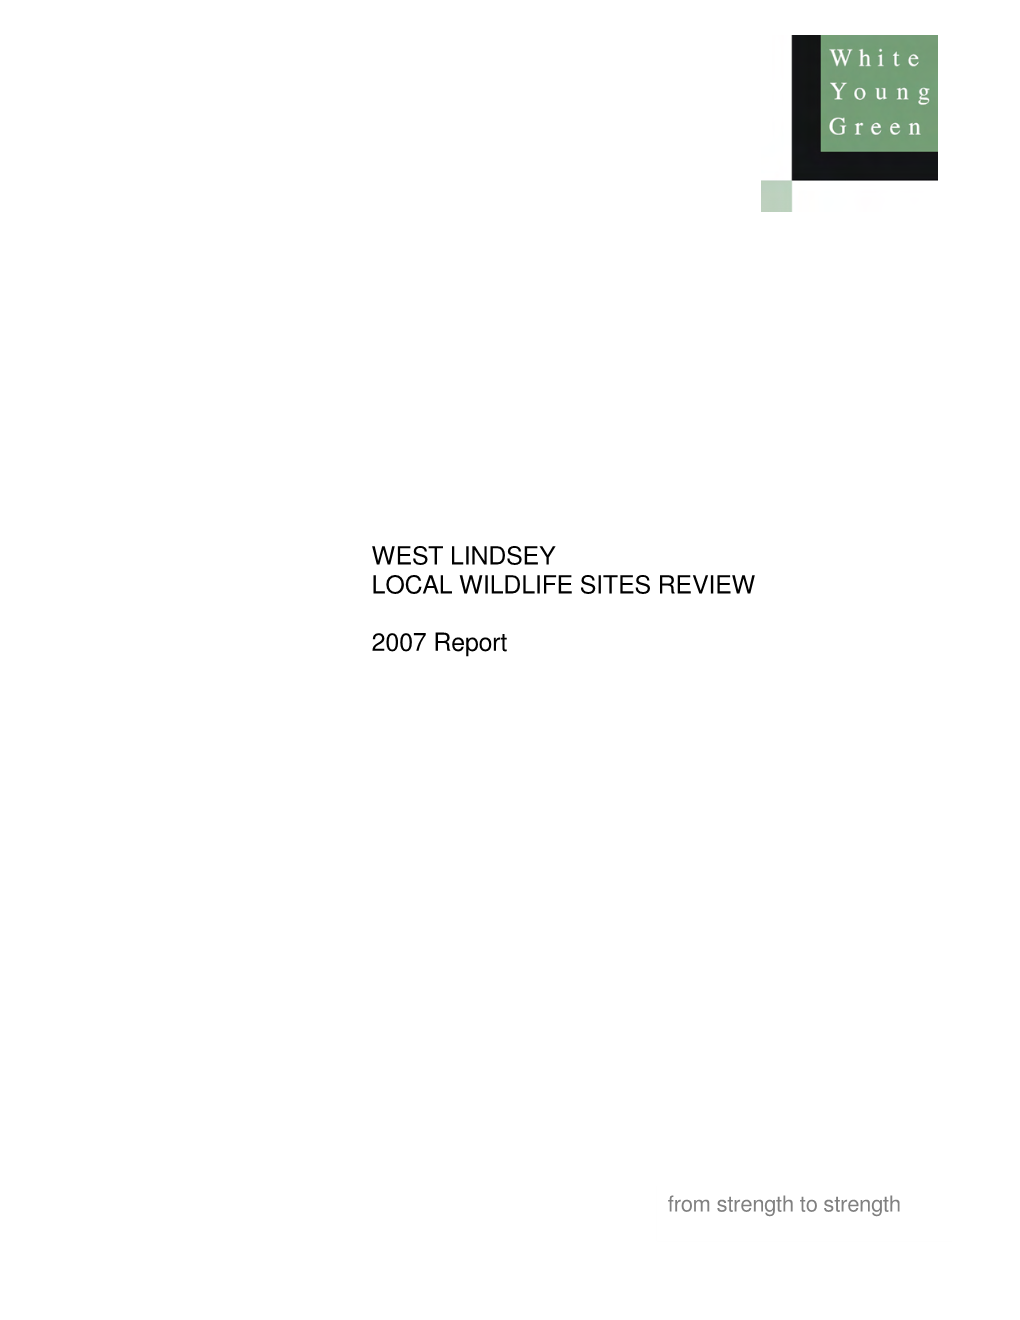 West Lindsey Local Wildlife Sites Review 2007 Survey Report [Pdf